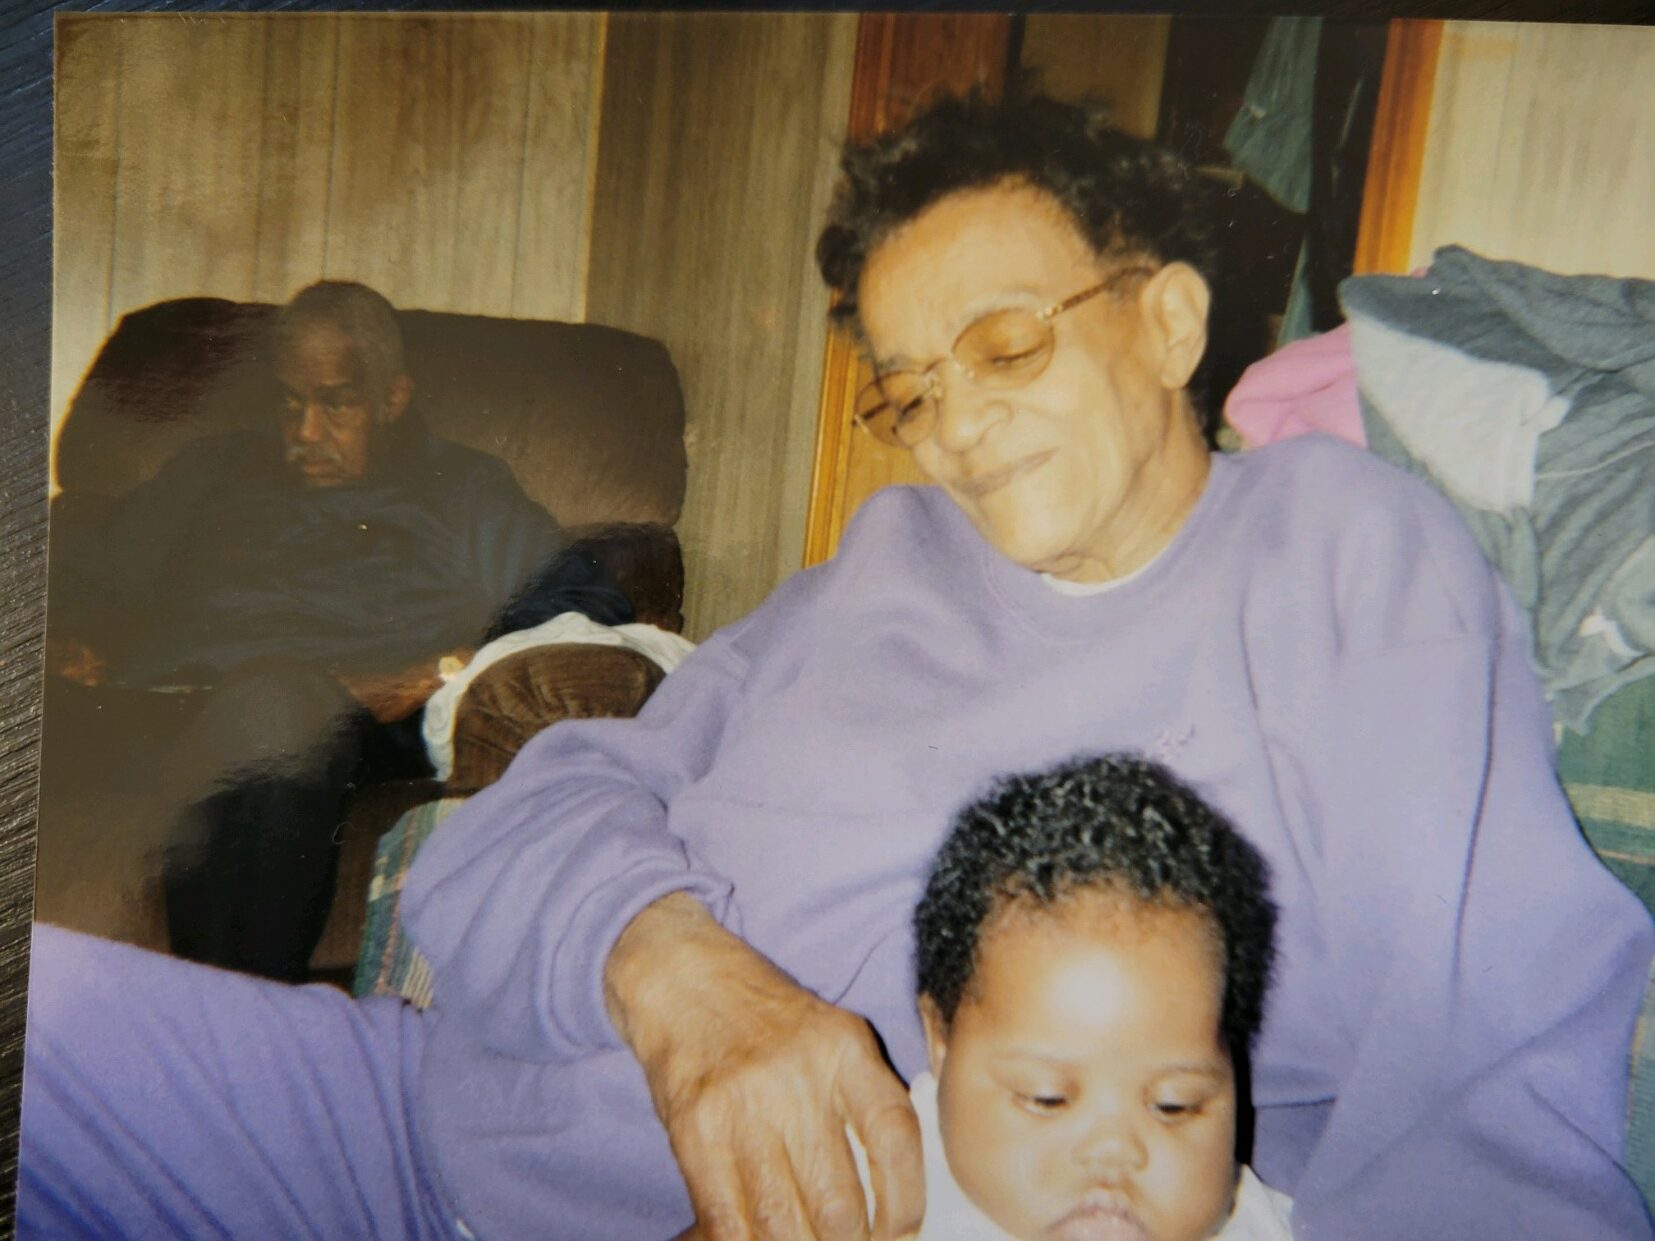 Person with medium dark skin and glasses wears lavender sweats and holds baby in lap, with person in armchair in background.